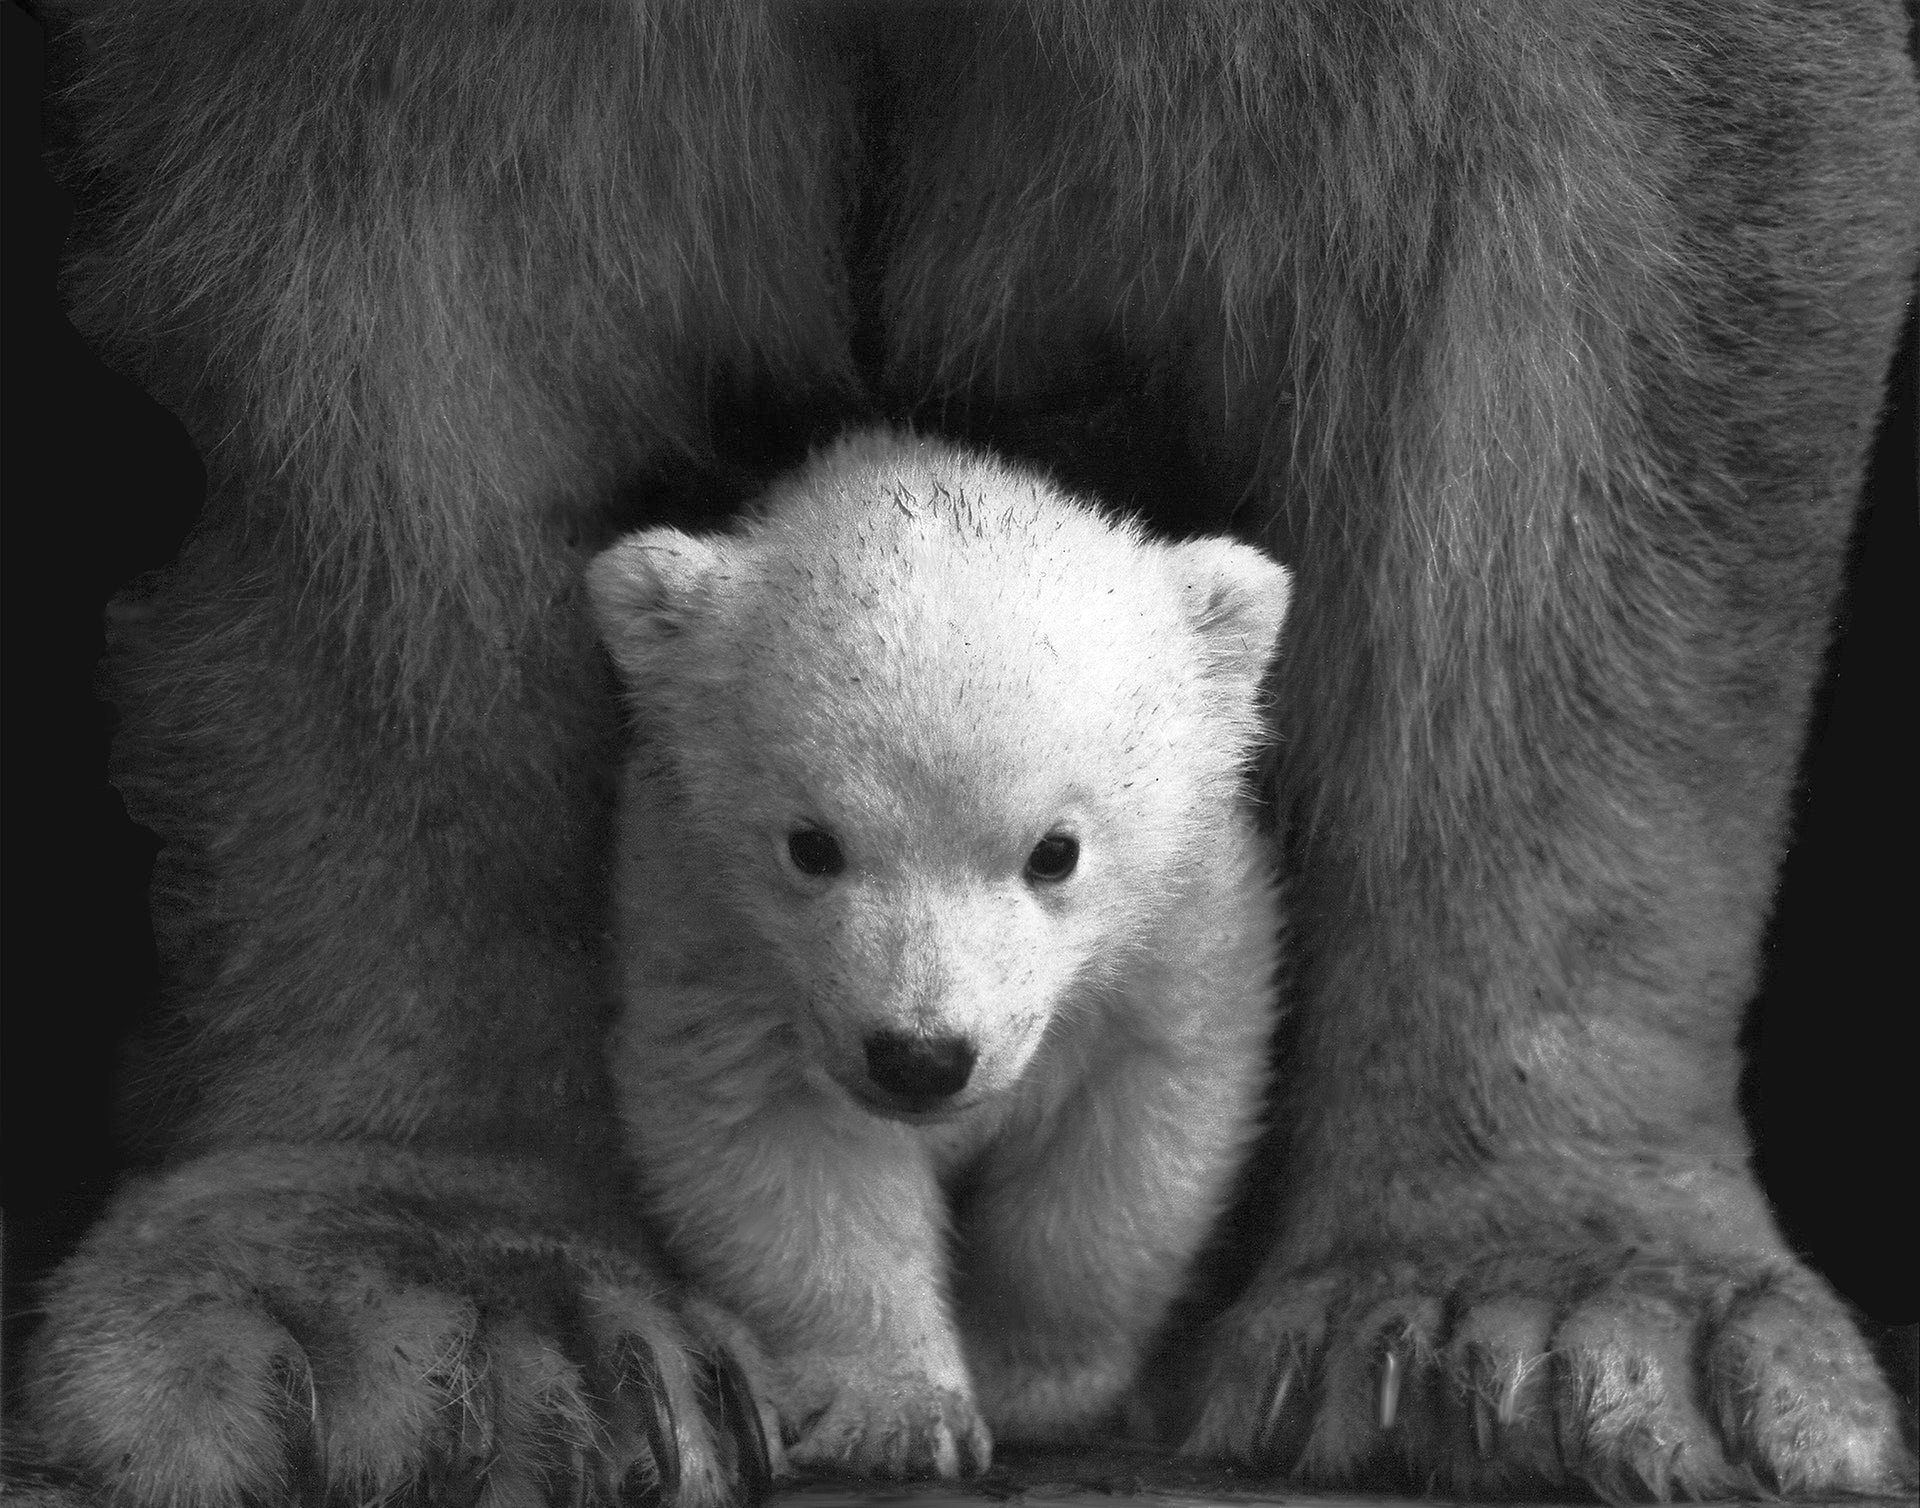 Cute Grizzly Baby Bear Wallpaper Free Download - Baby Cute Grizzly Bear - HD Wallpaper 